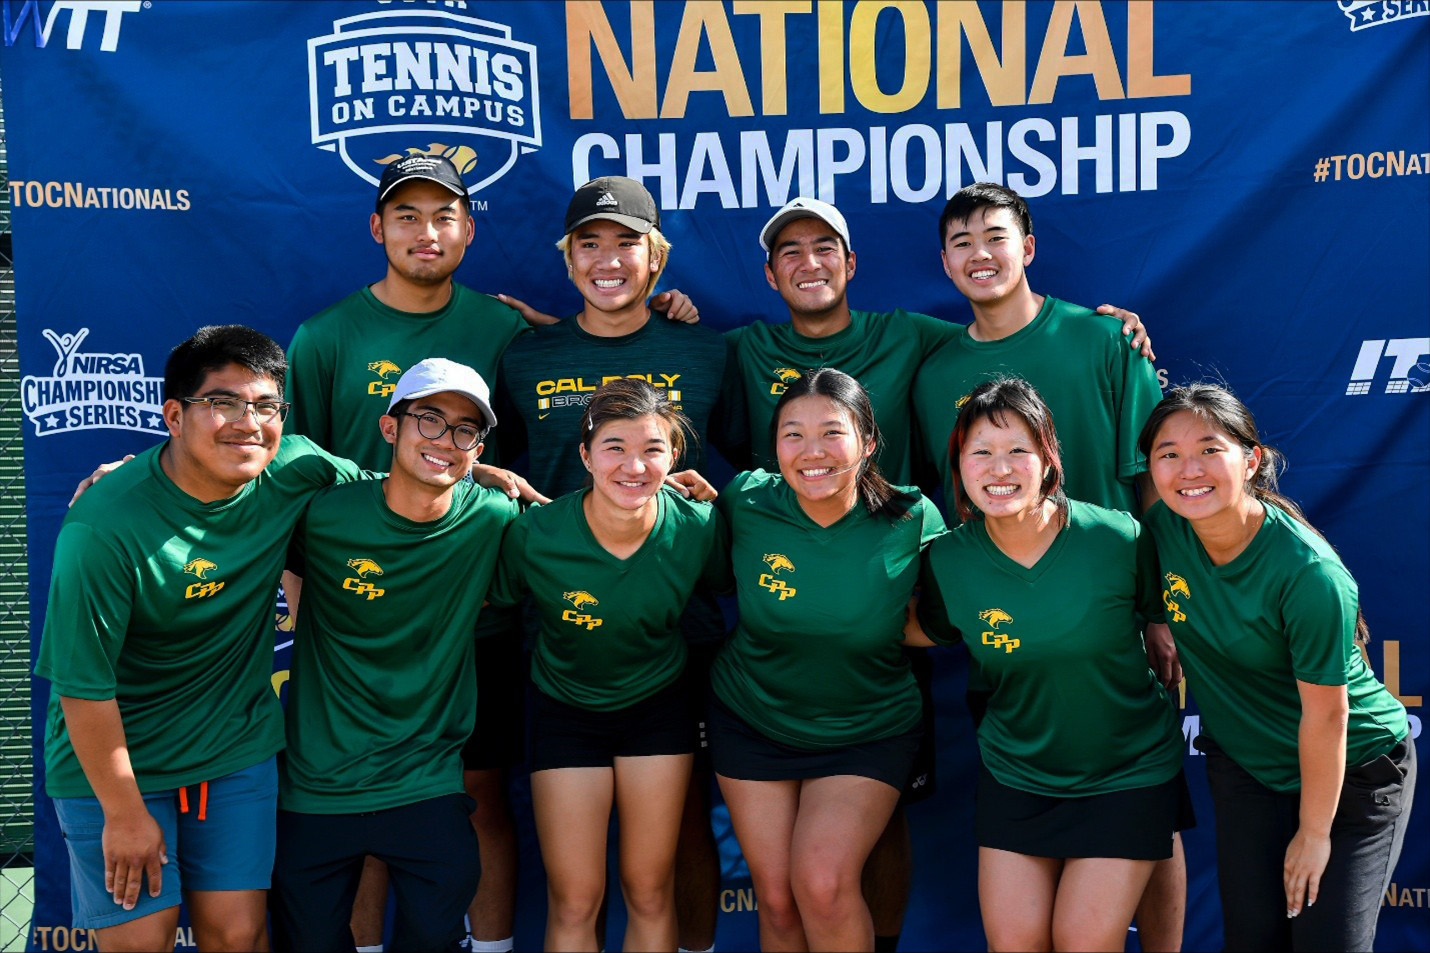 CPP’s tennis club aces the competition at the USTA Tennis on Campus